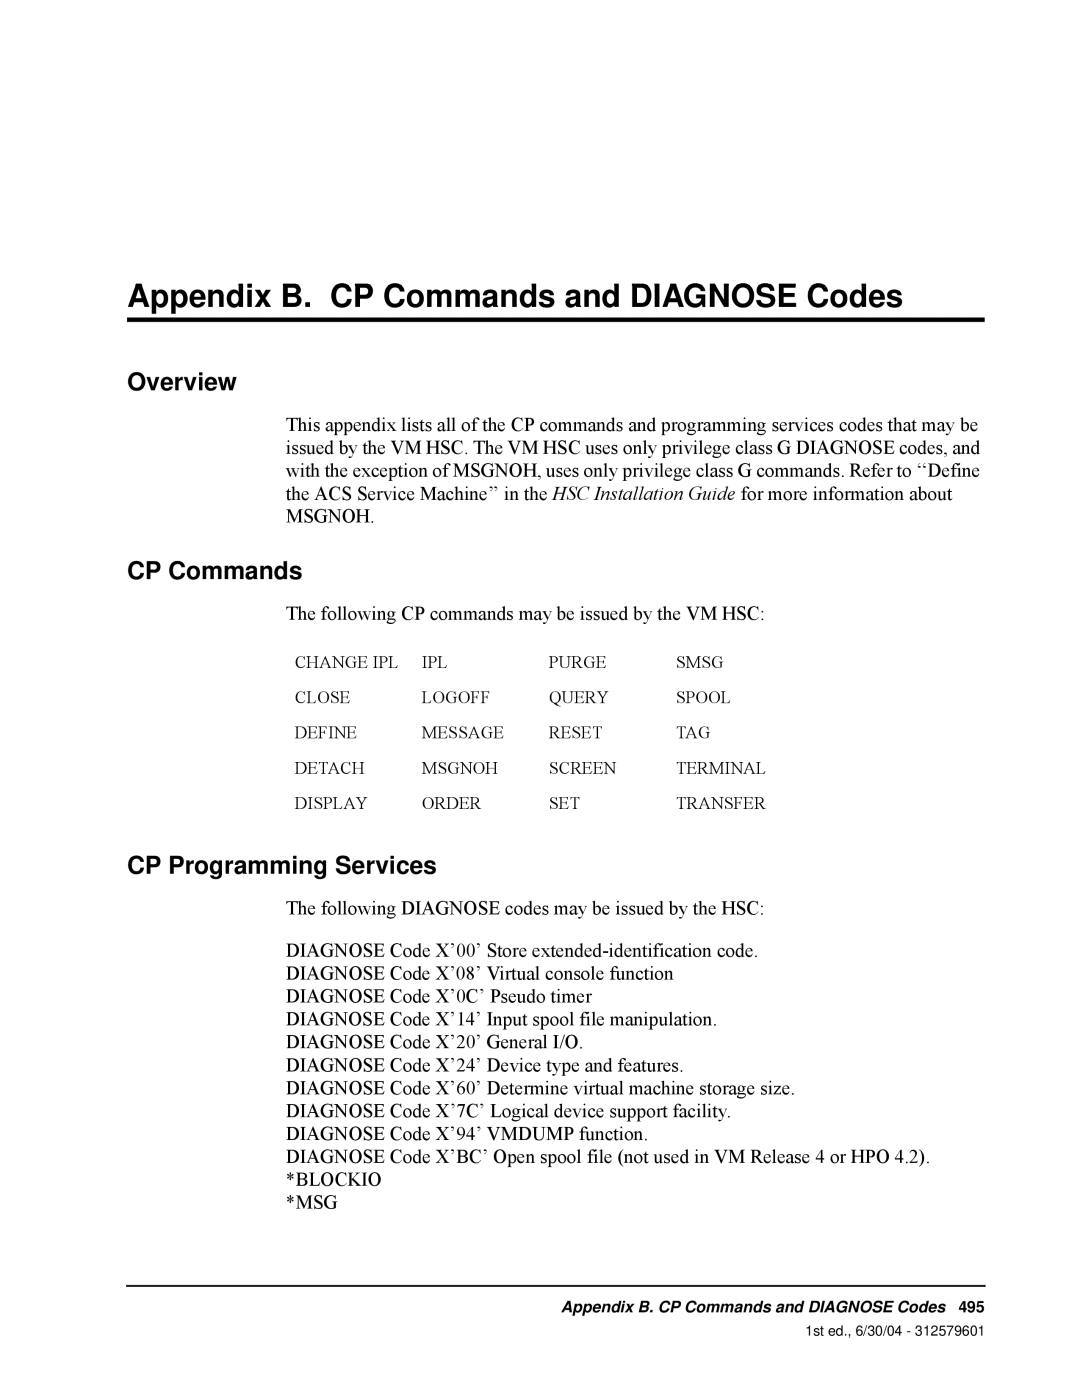 StorageTek 6 manual Appendix B. CP Commands and DIAGNOSE Codes, CP Programming Services, Overview 